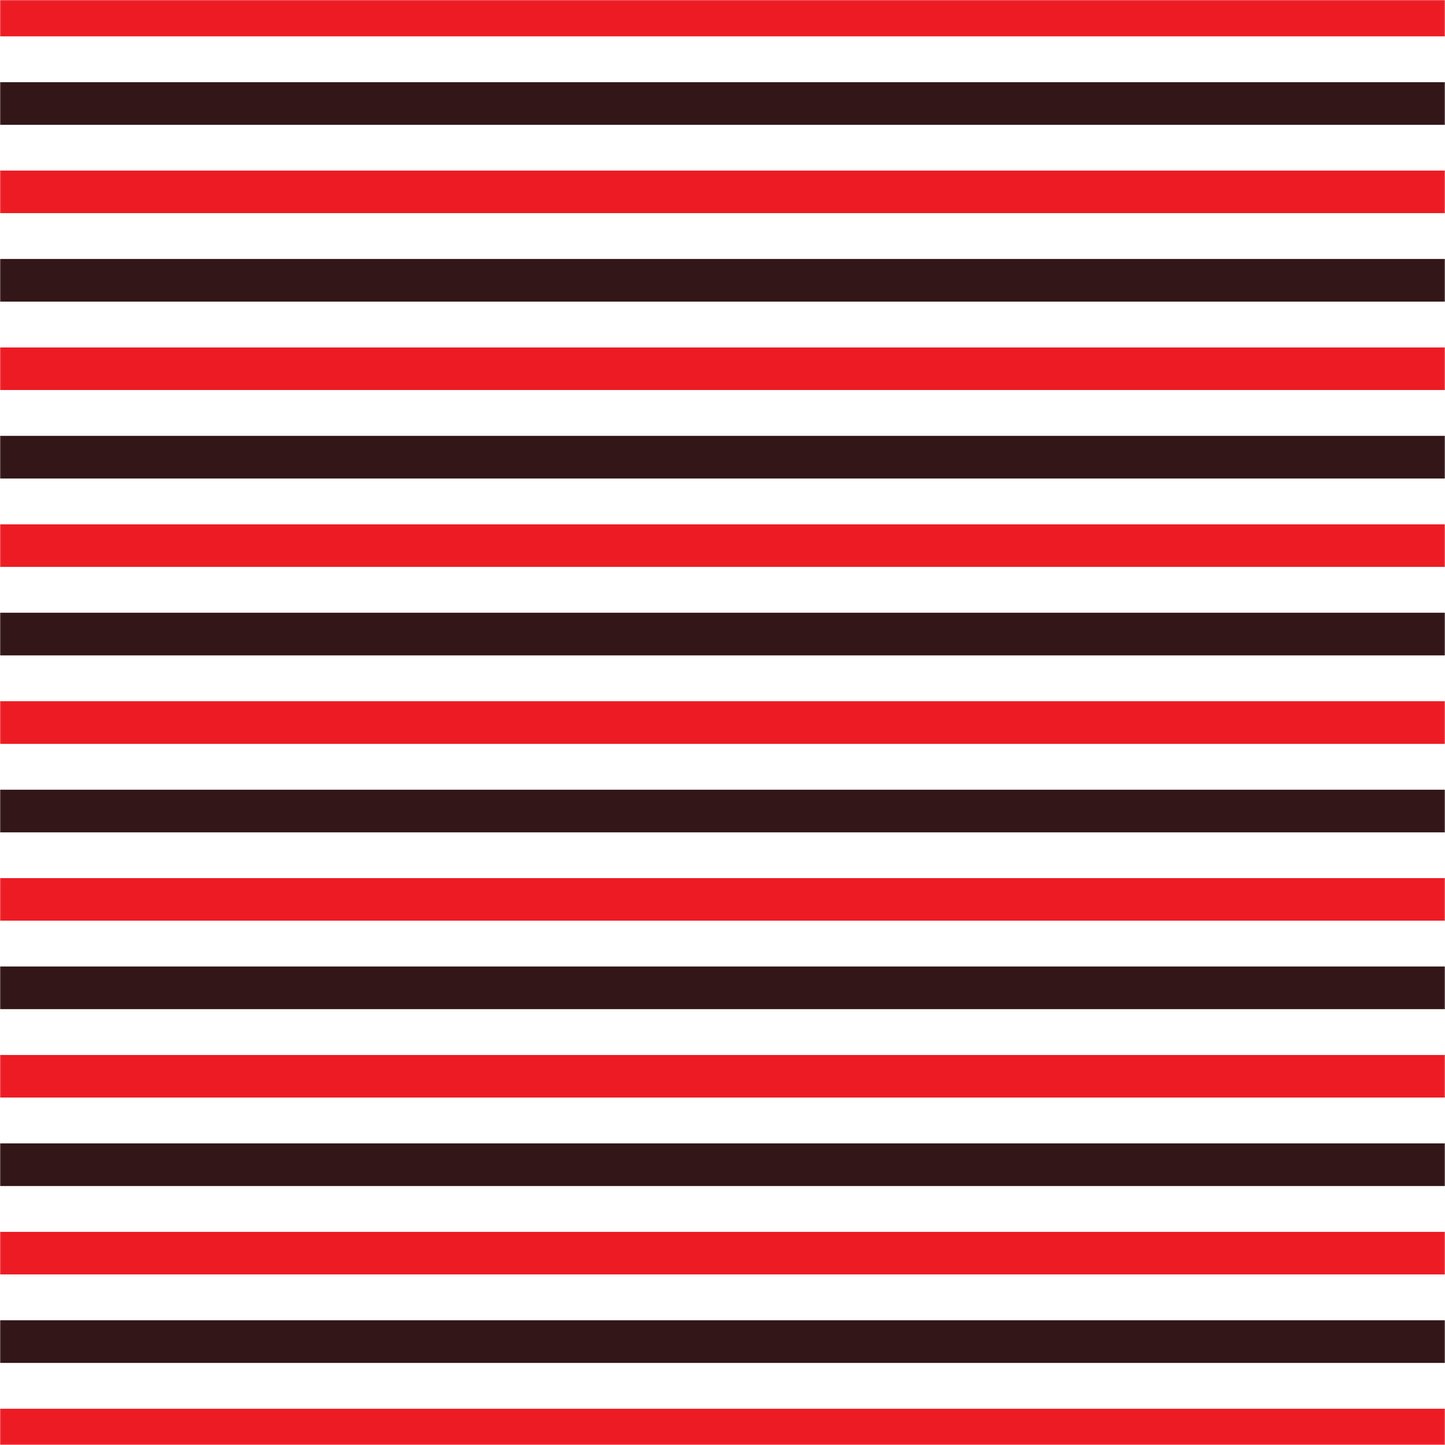 Canada Day - Red White and Black Stripes 012